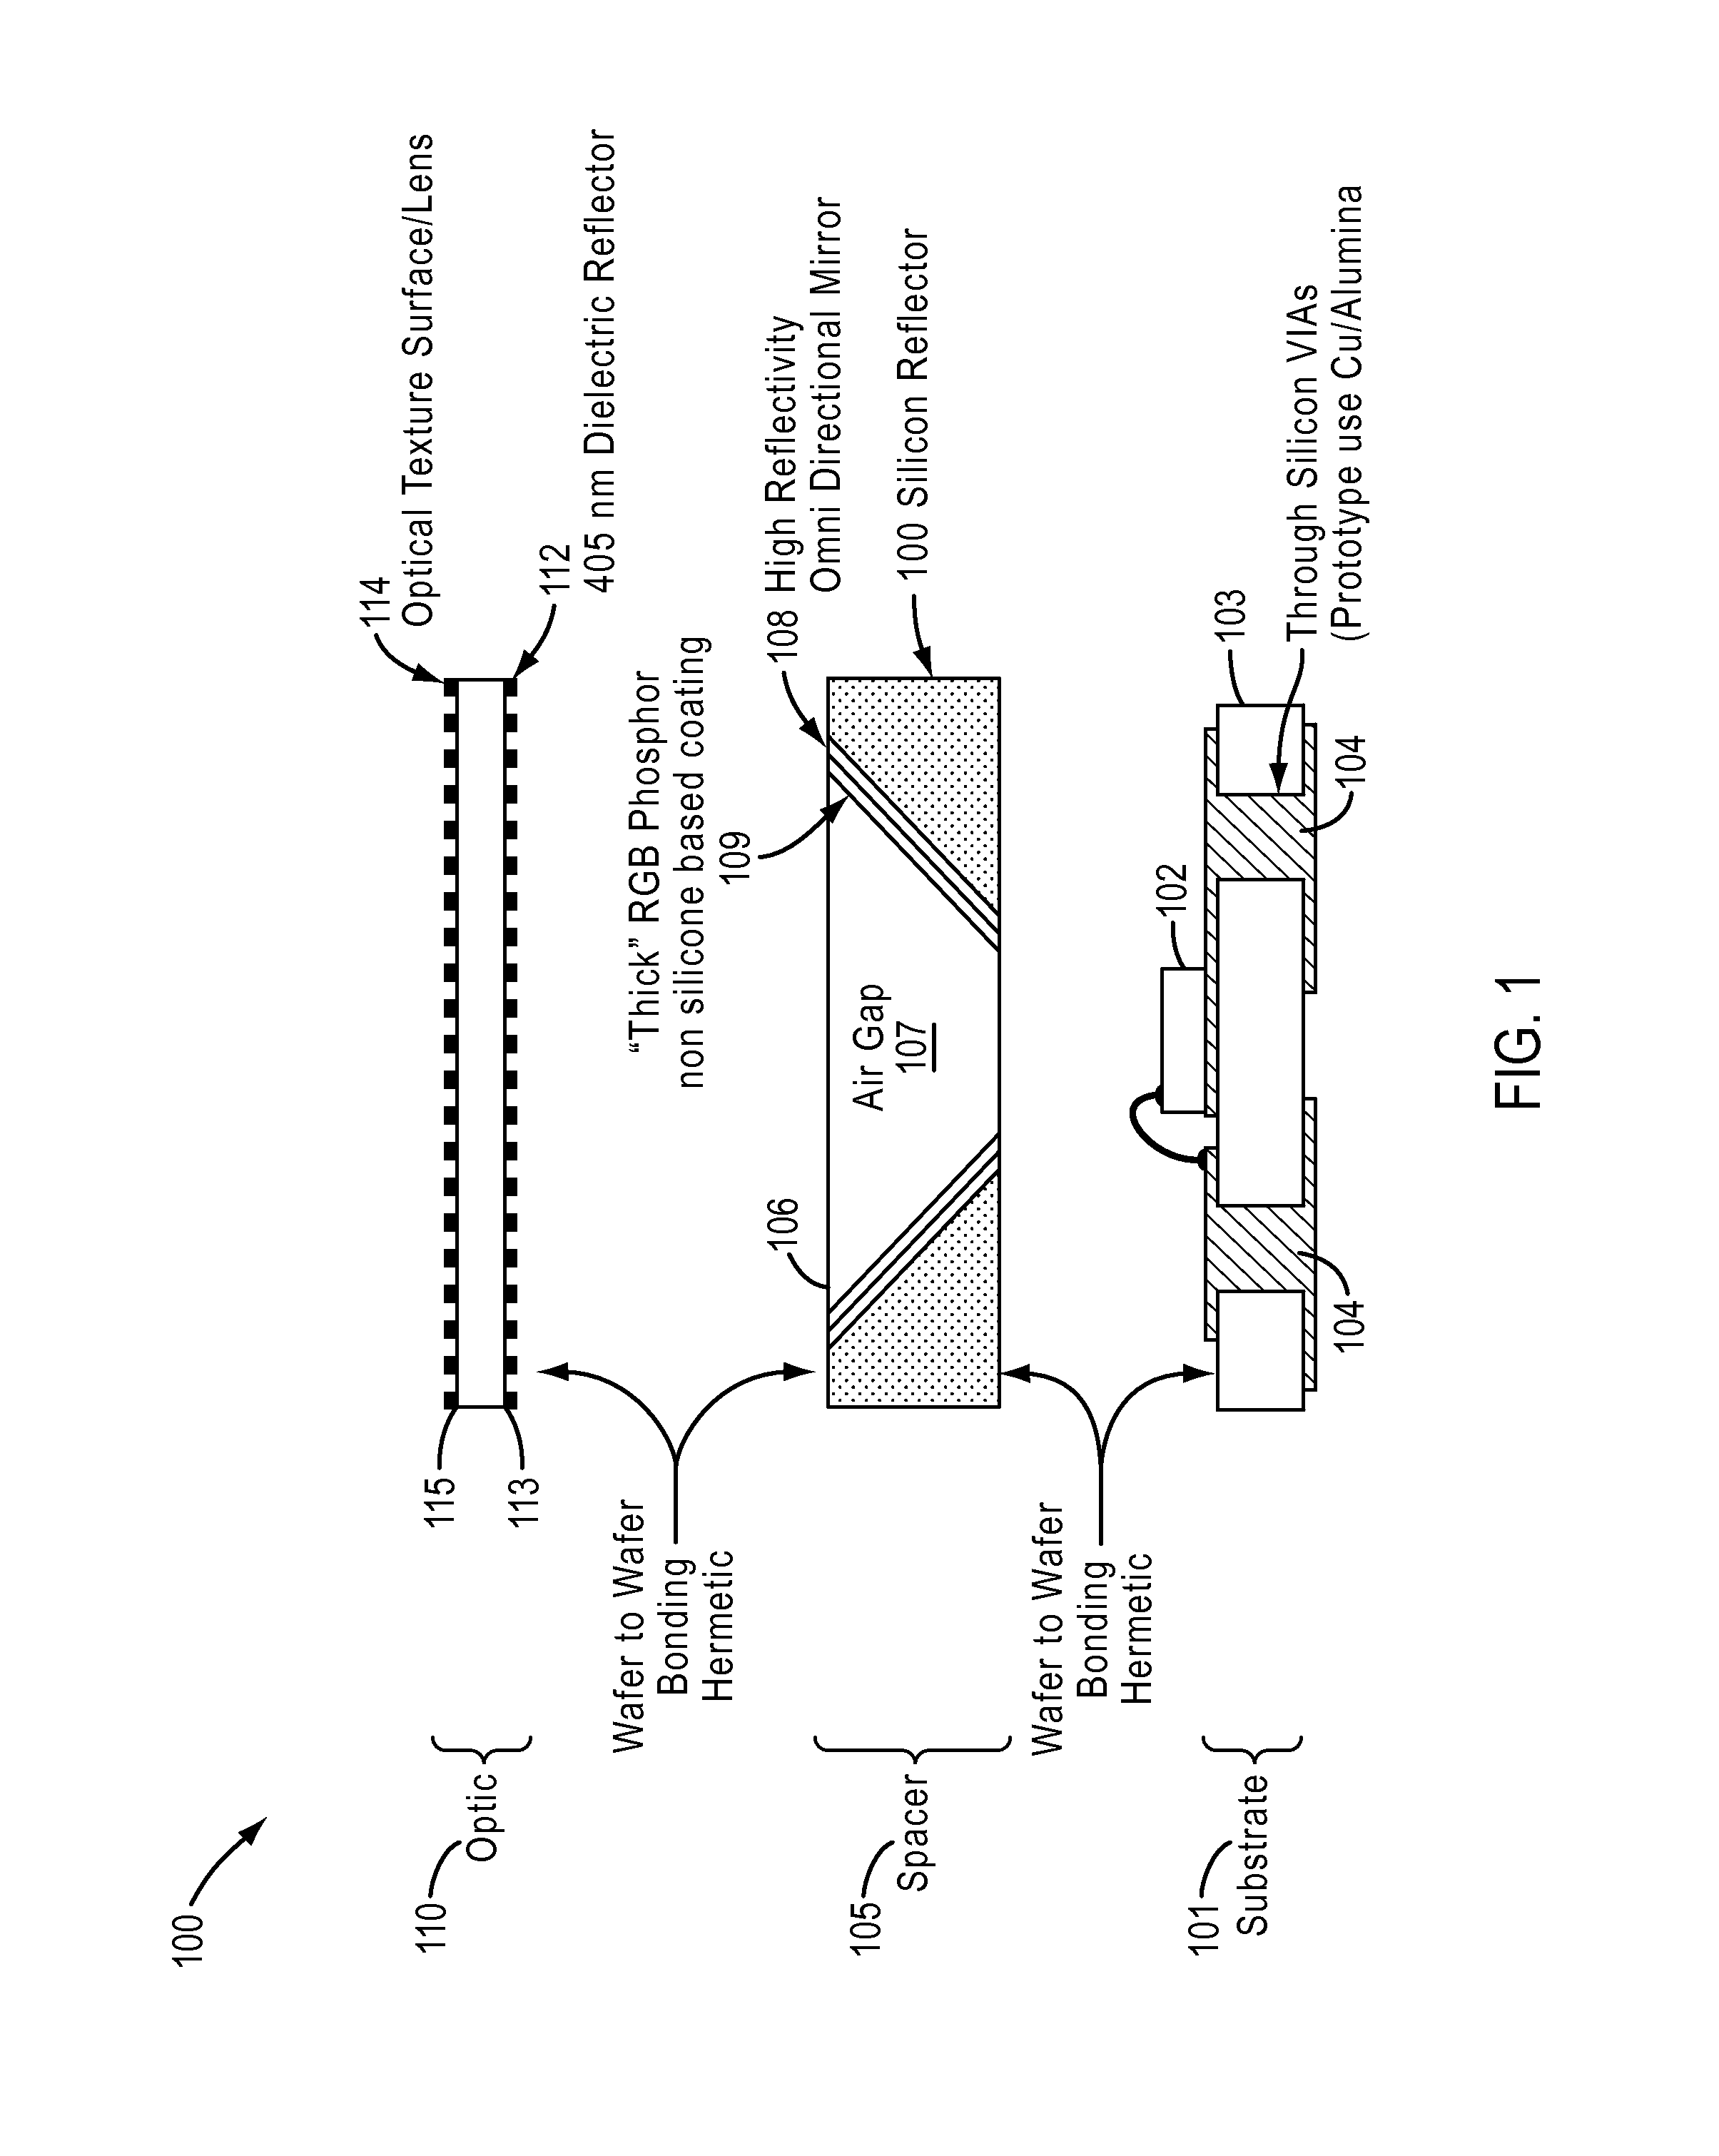 Optical devices having reflection mode wavelength material